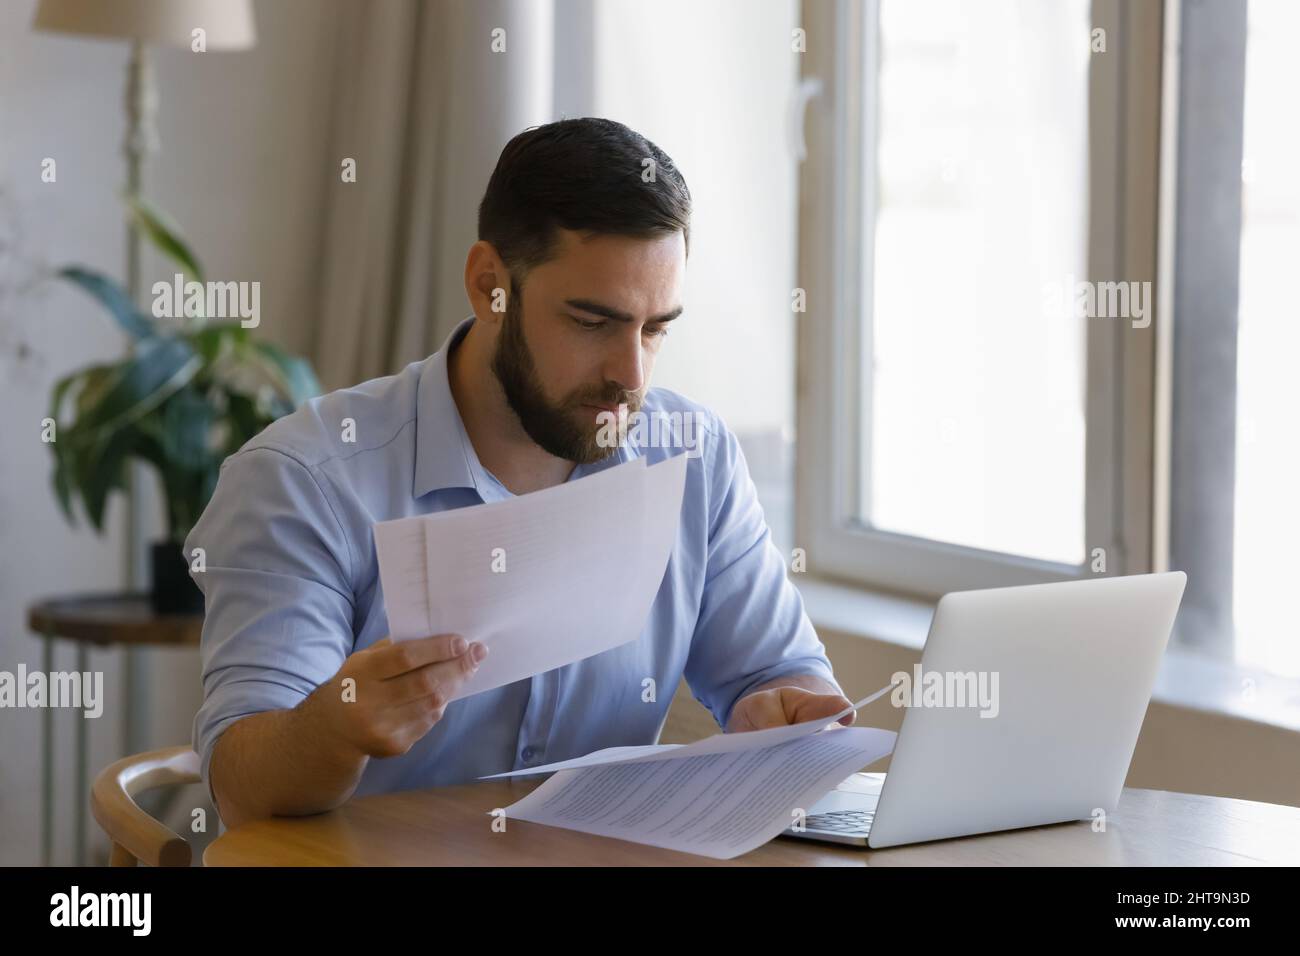 Serious man sit at table with laptop sorting out papers Stock Photo